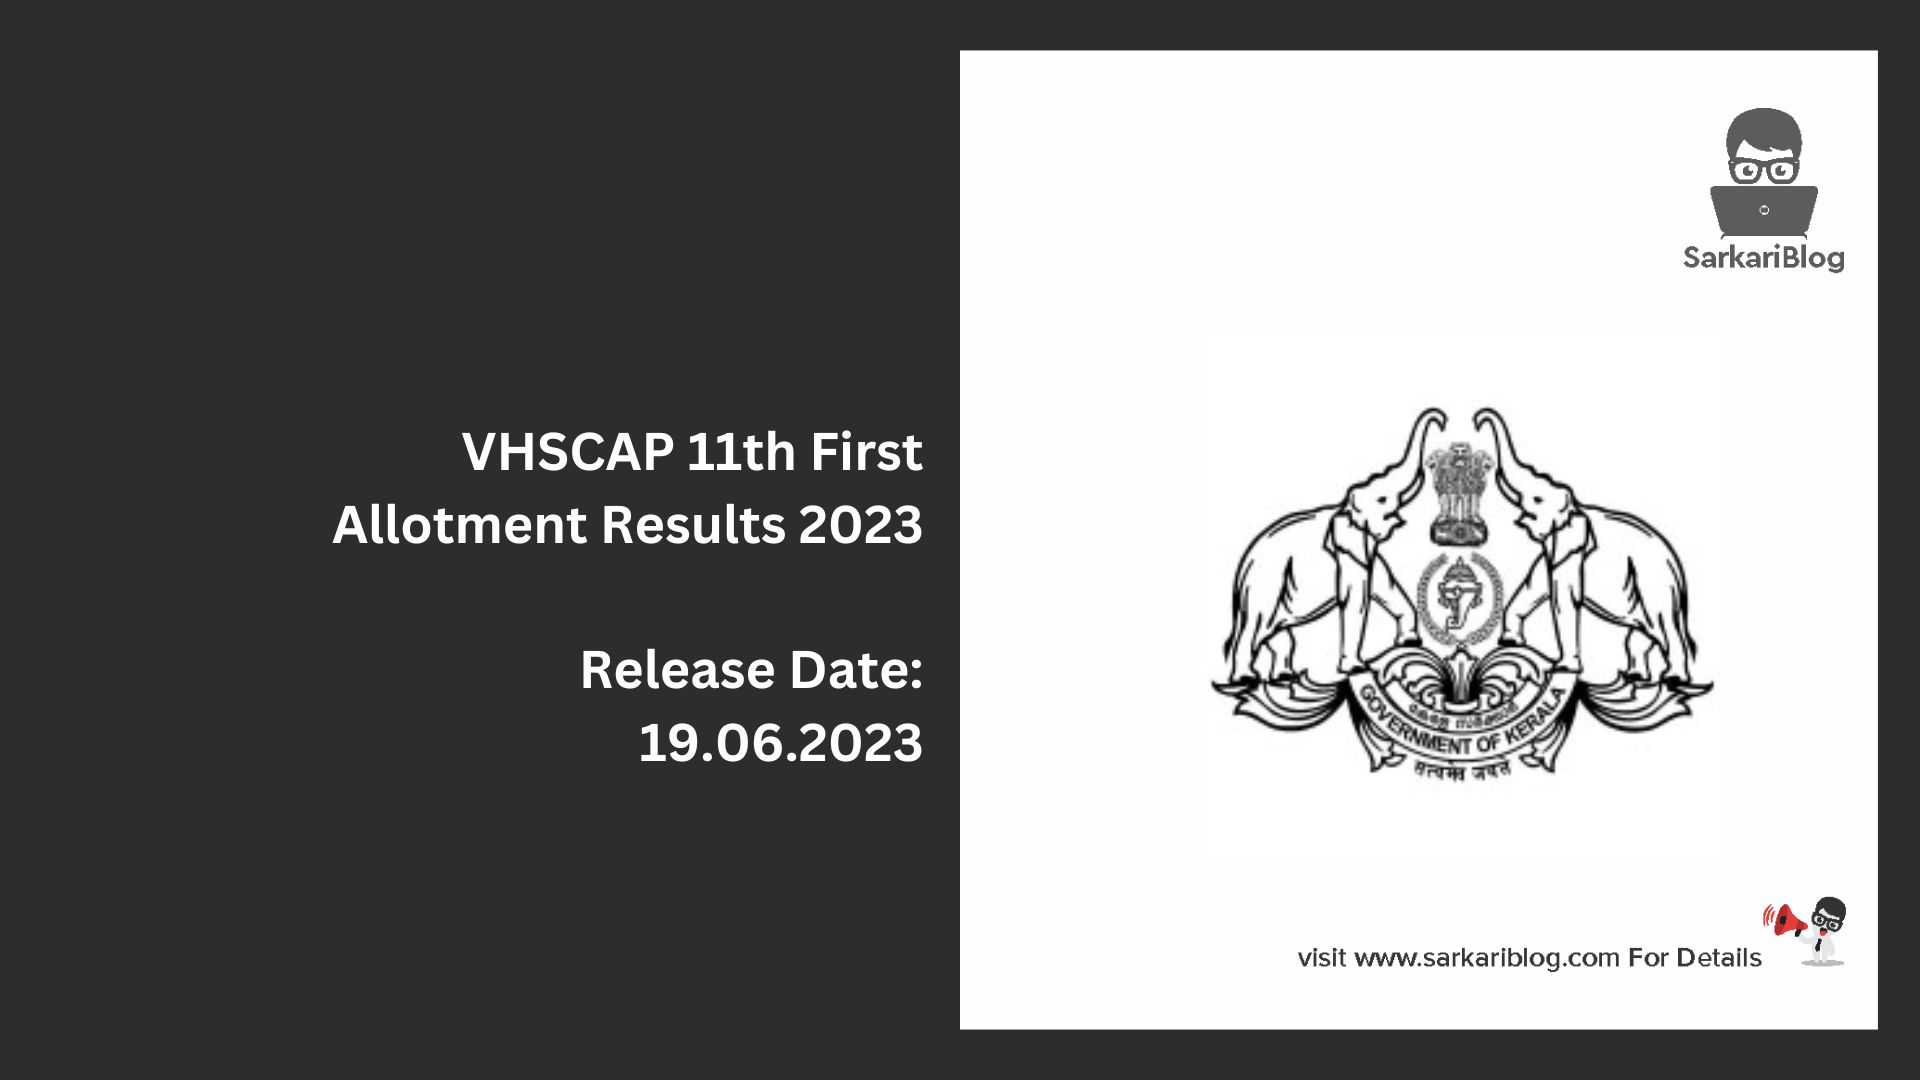 VHSCAP 11th First Allotment Results 2023